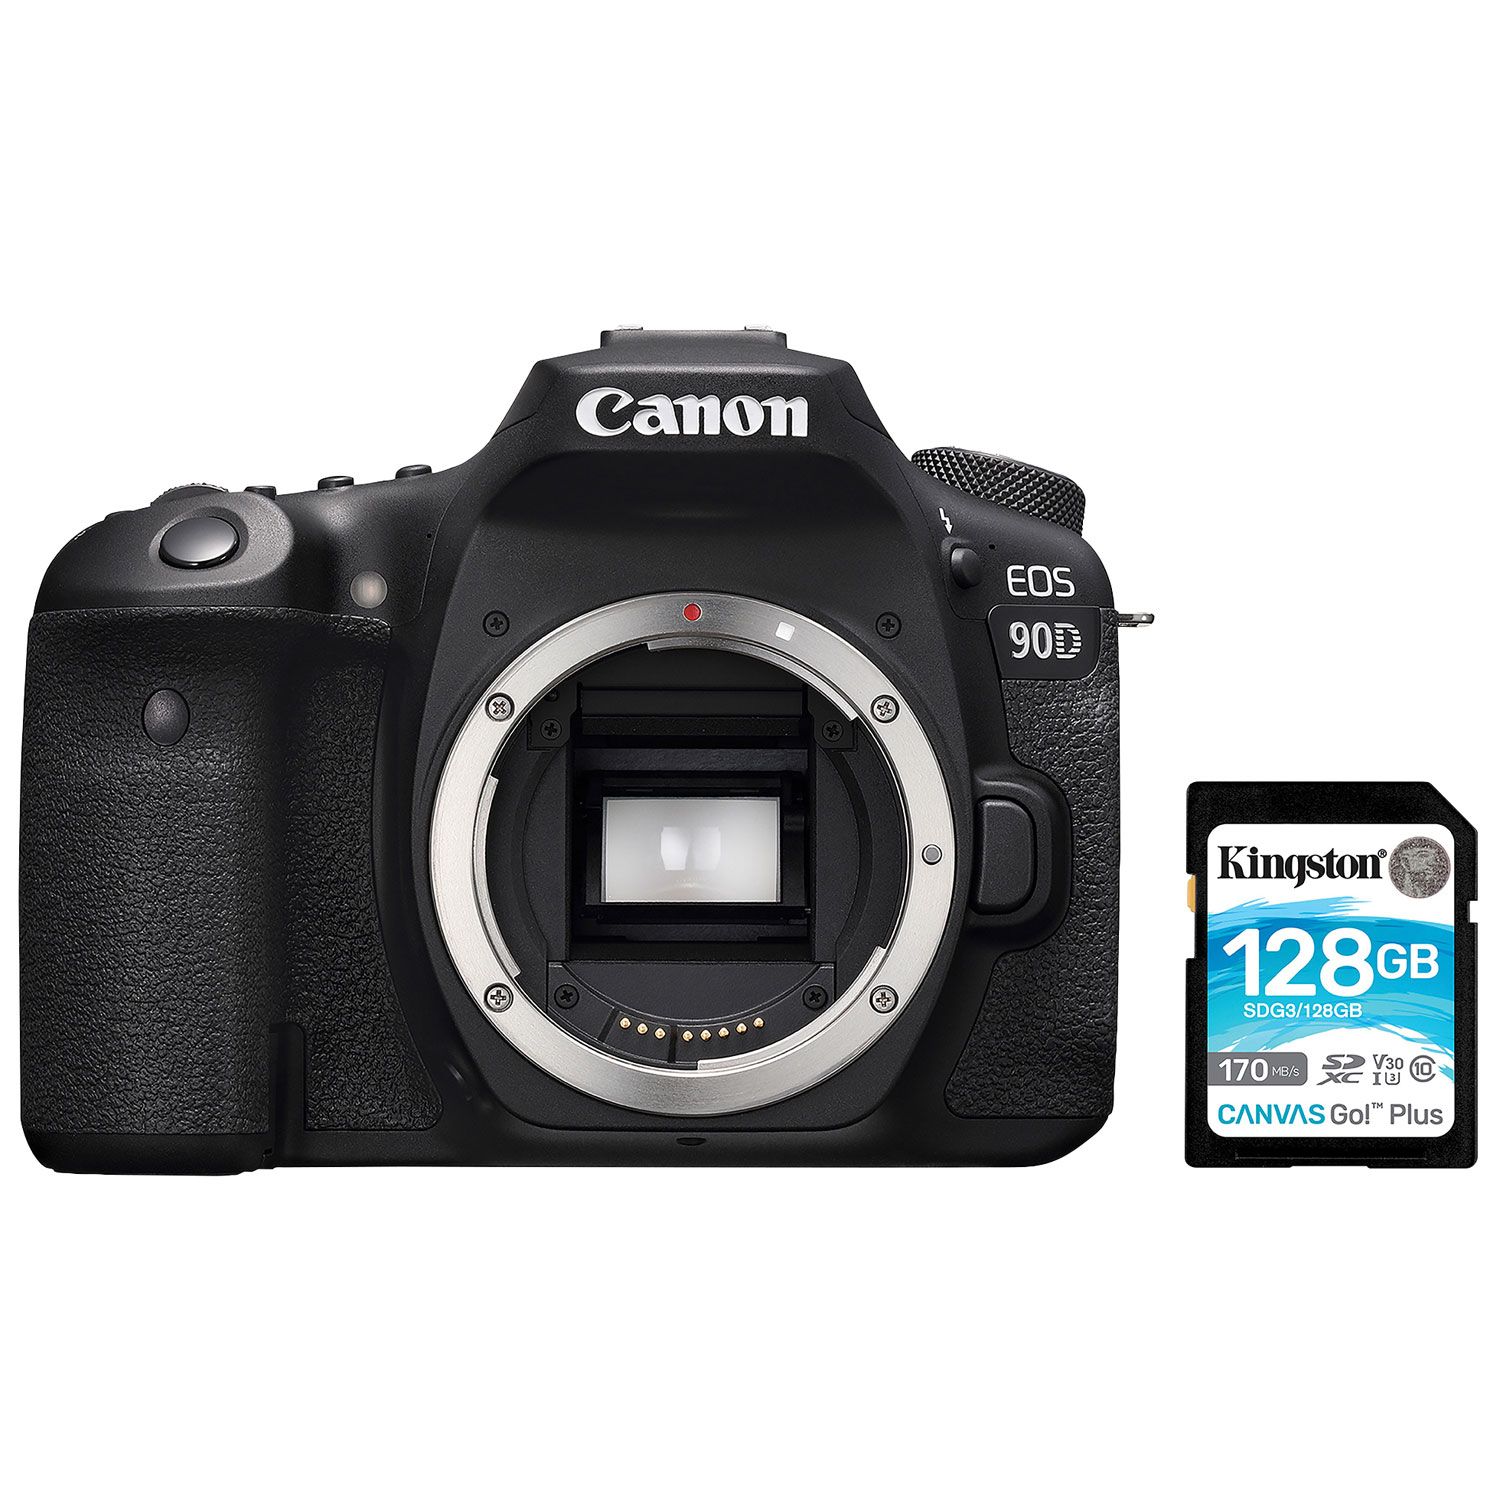 Canon EOS 90D DSLR Camera (Body Only) with 128GB Memory Card